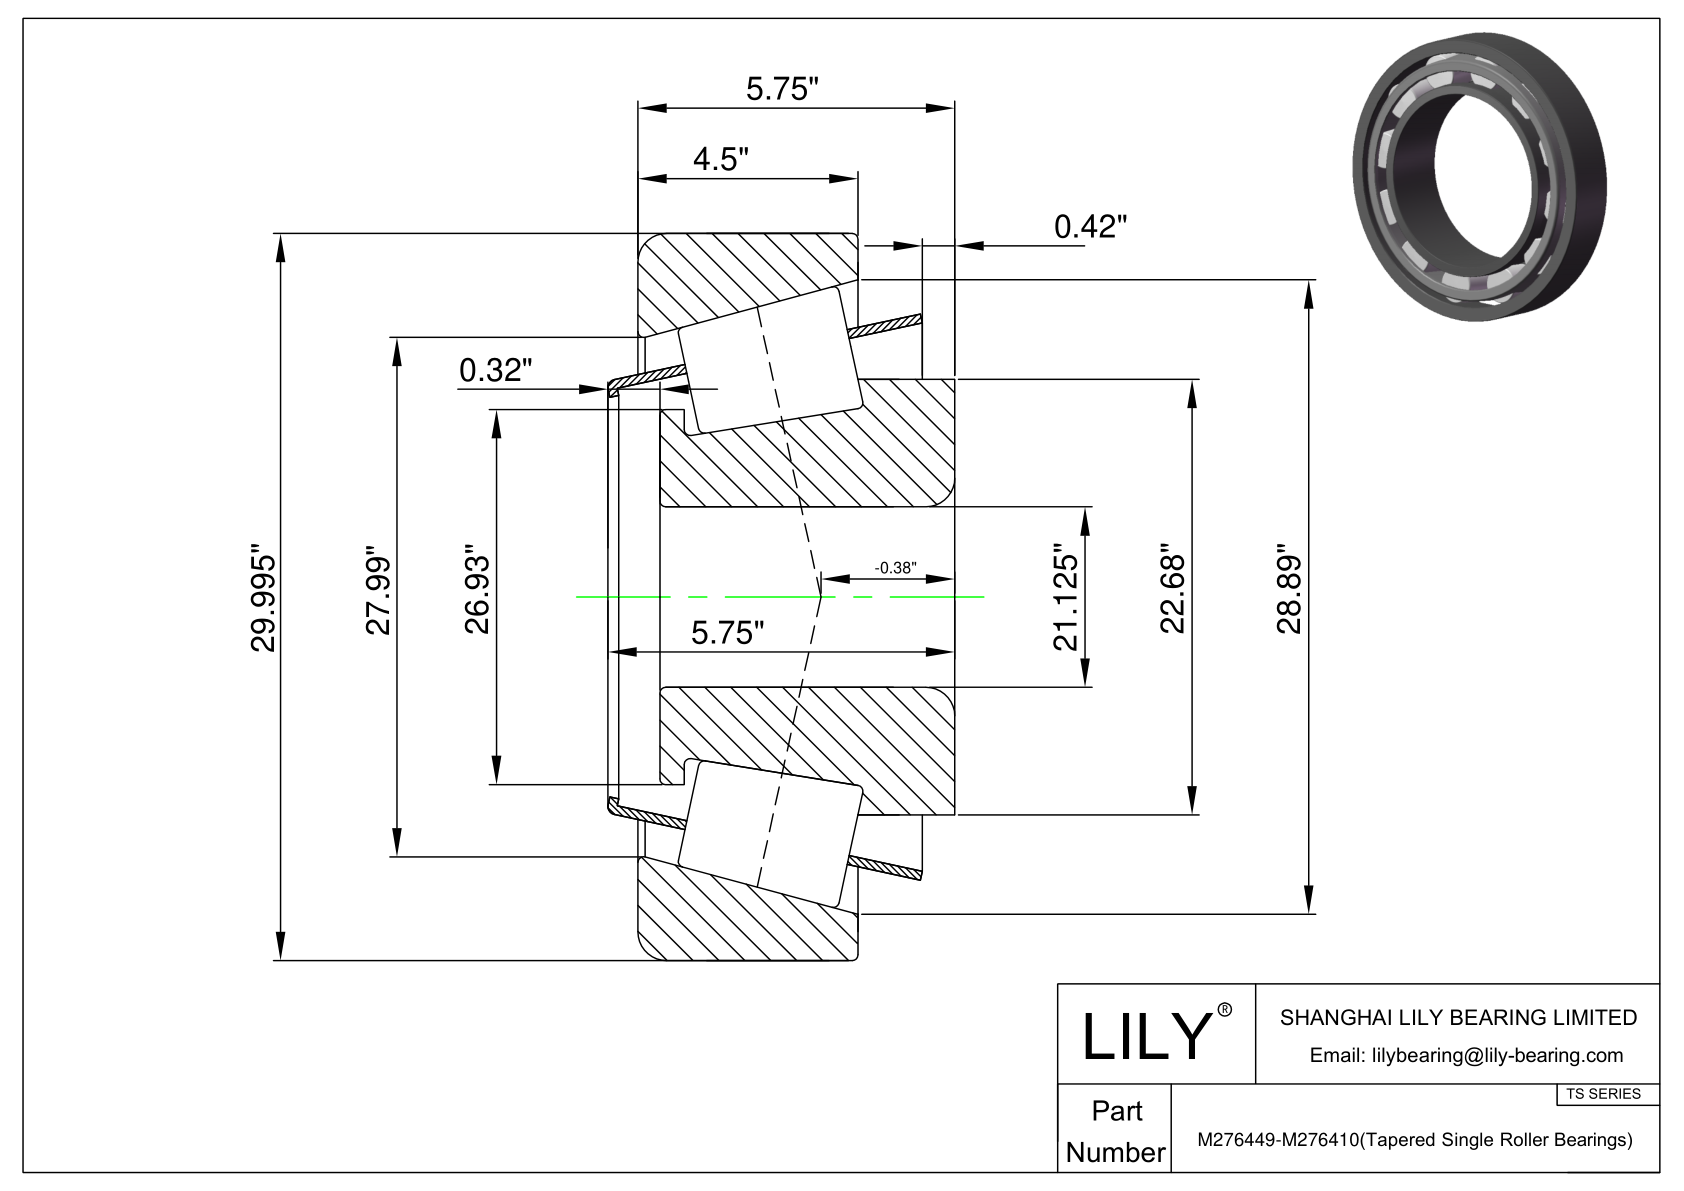 M276449-M276410 TS (Tapered Single Roller Bearings) (Imperial) cad drawing